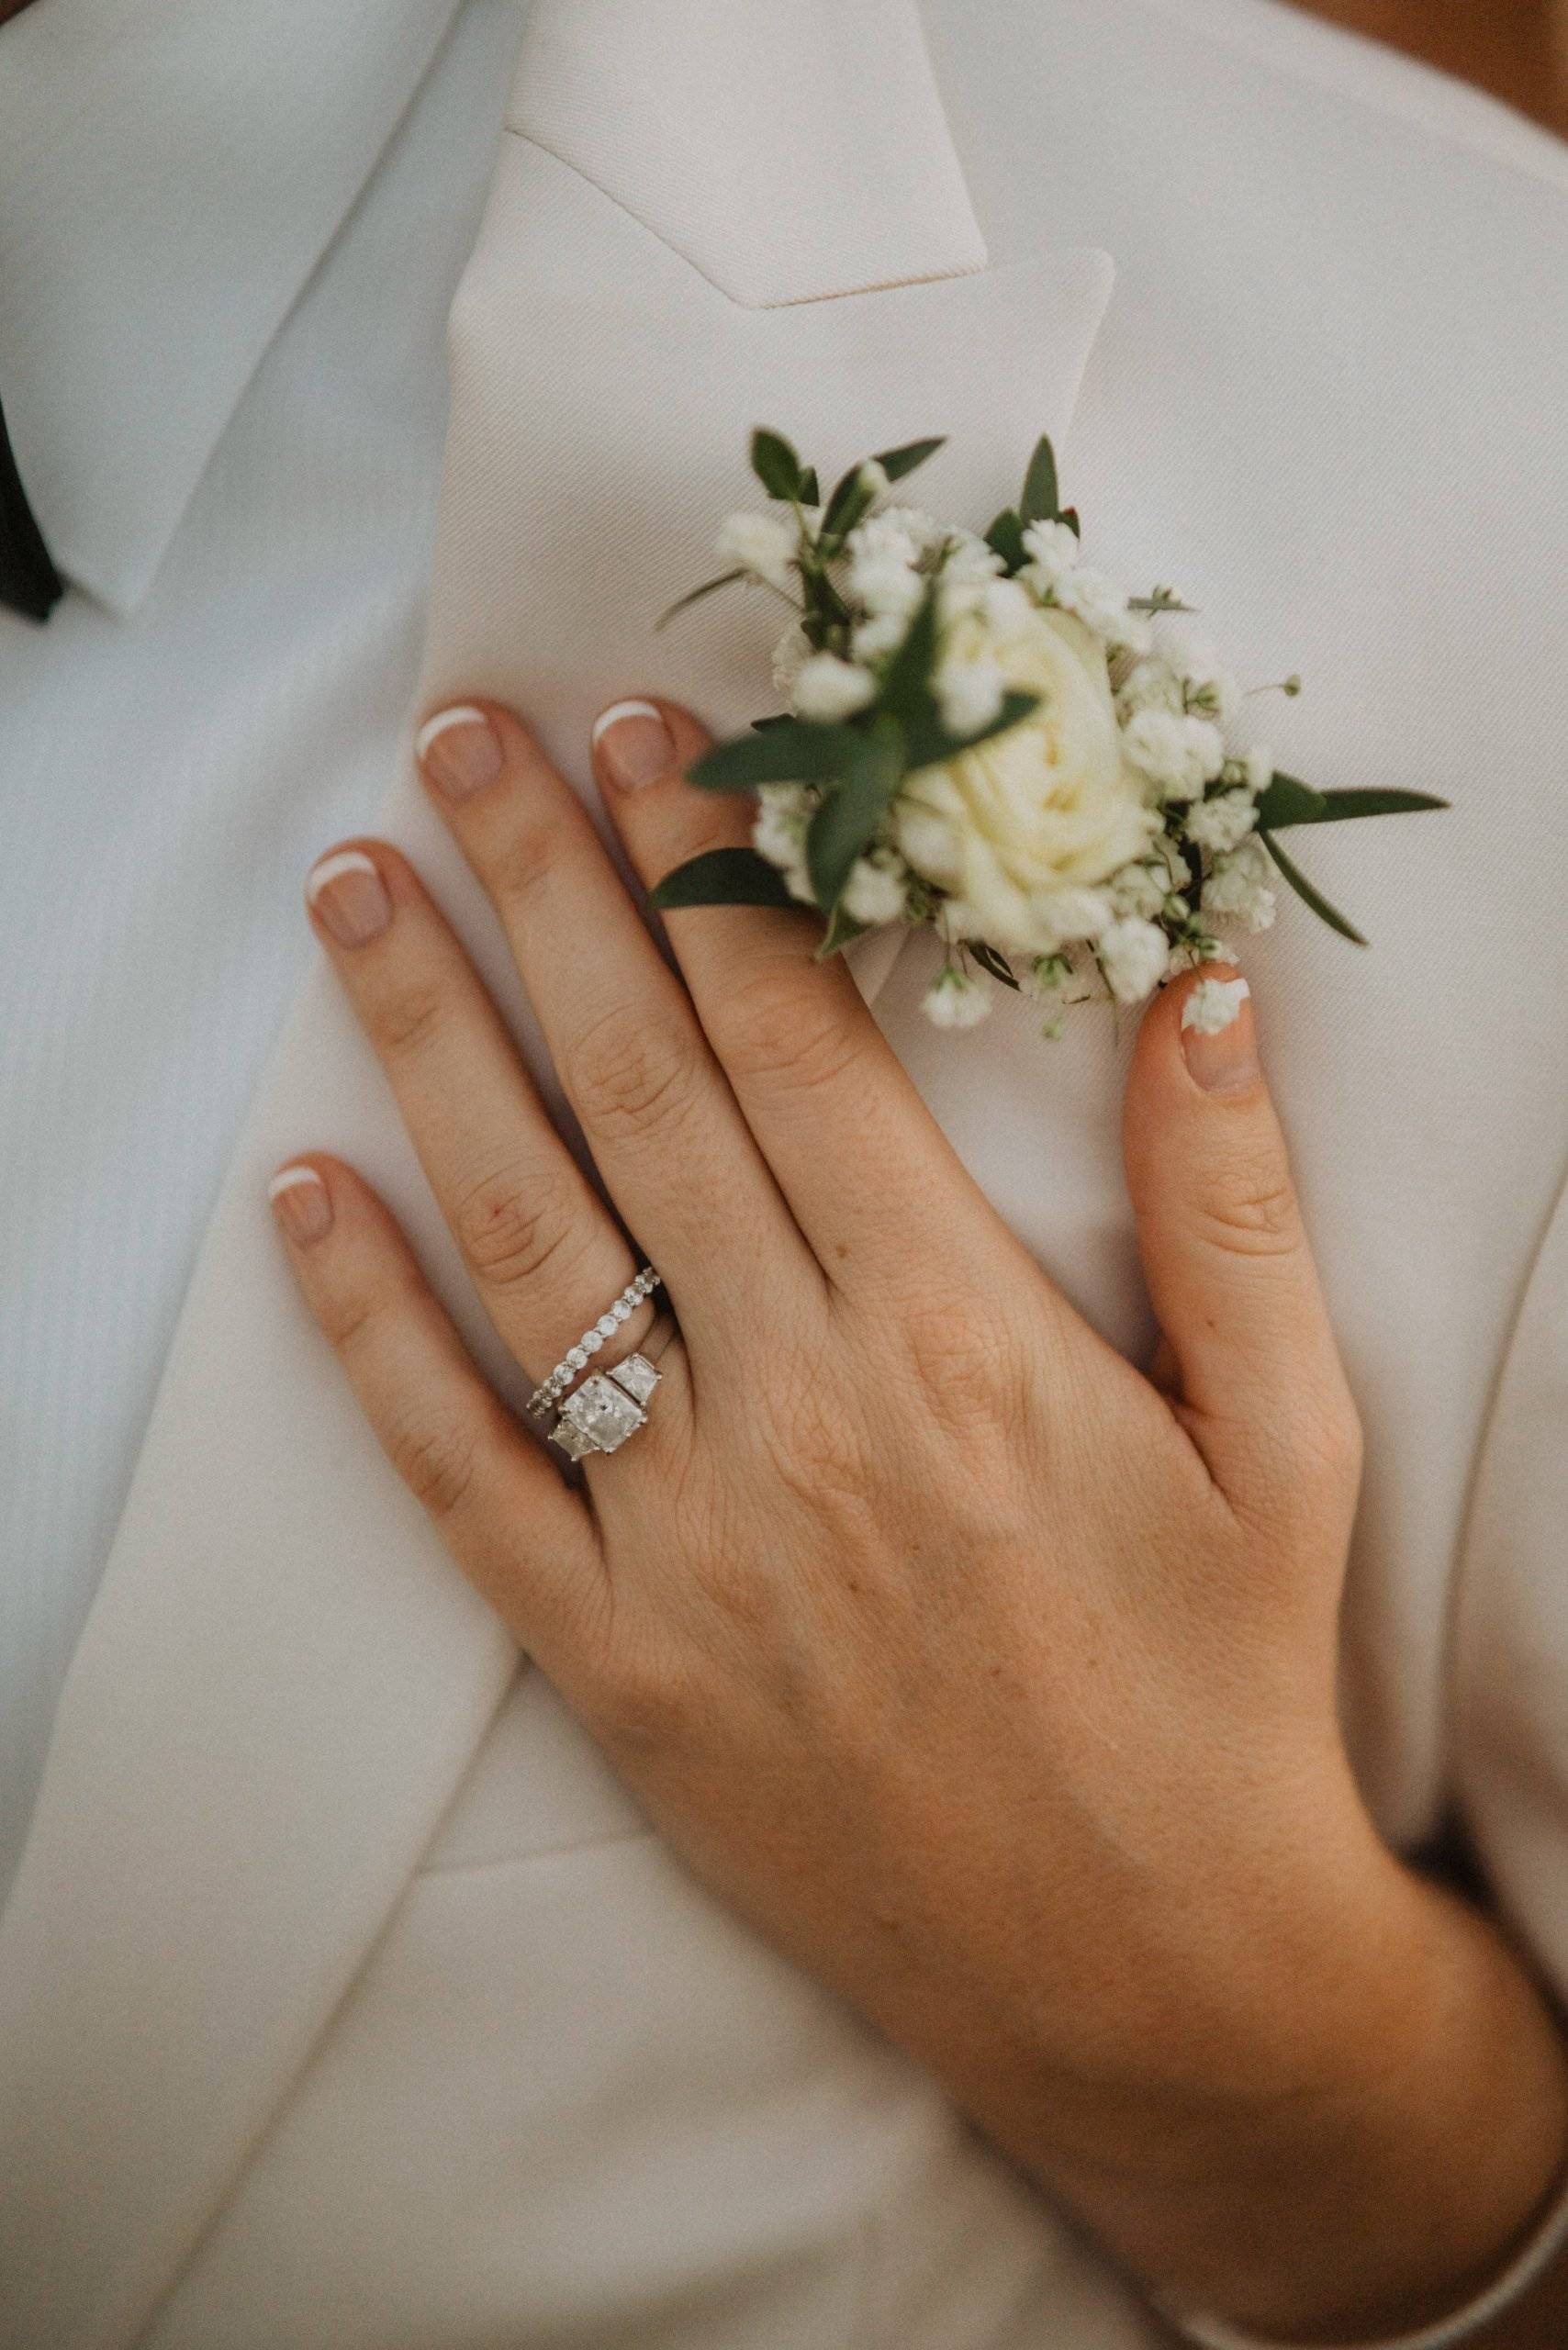 Image of brides hand on suit jacket with wedding band shown in Jupiter Florida